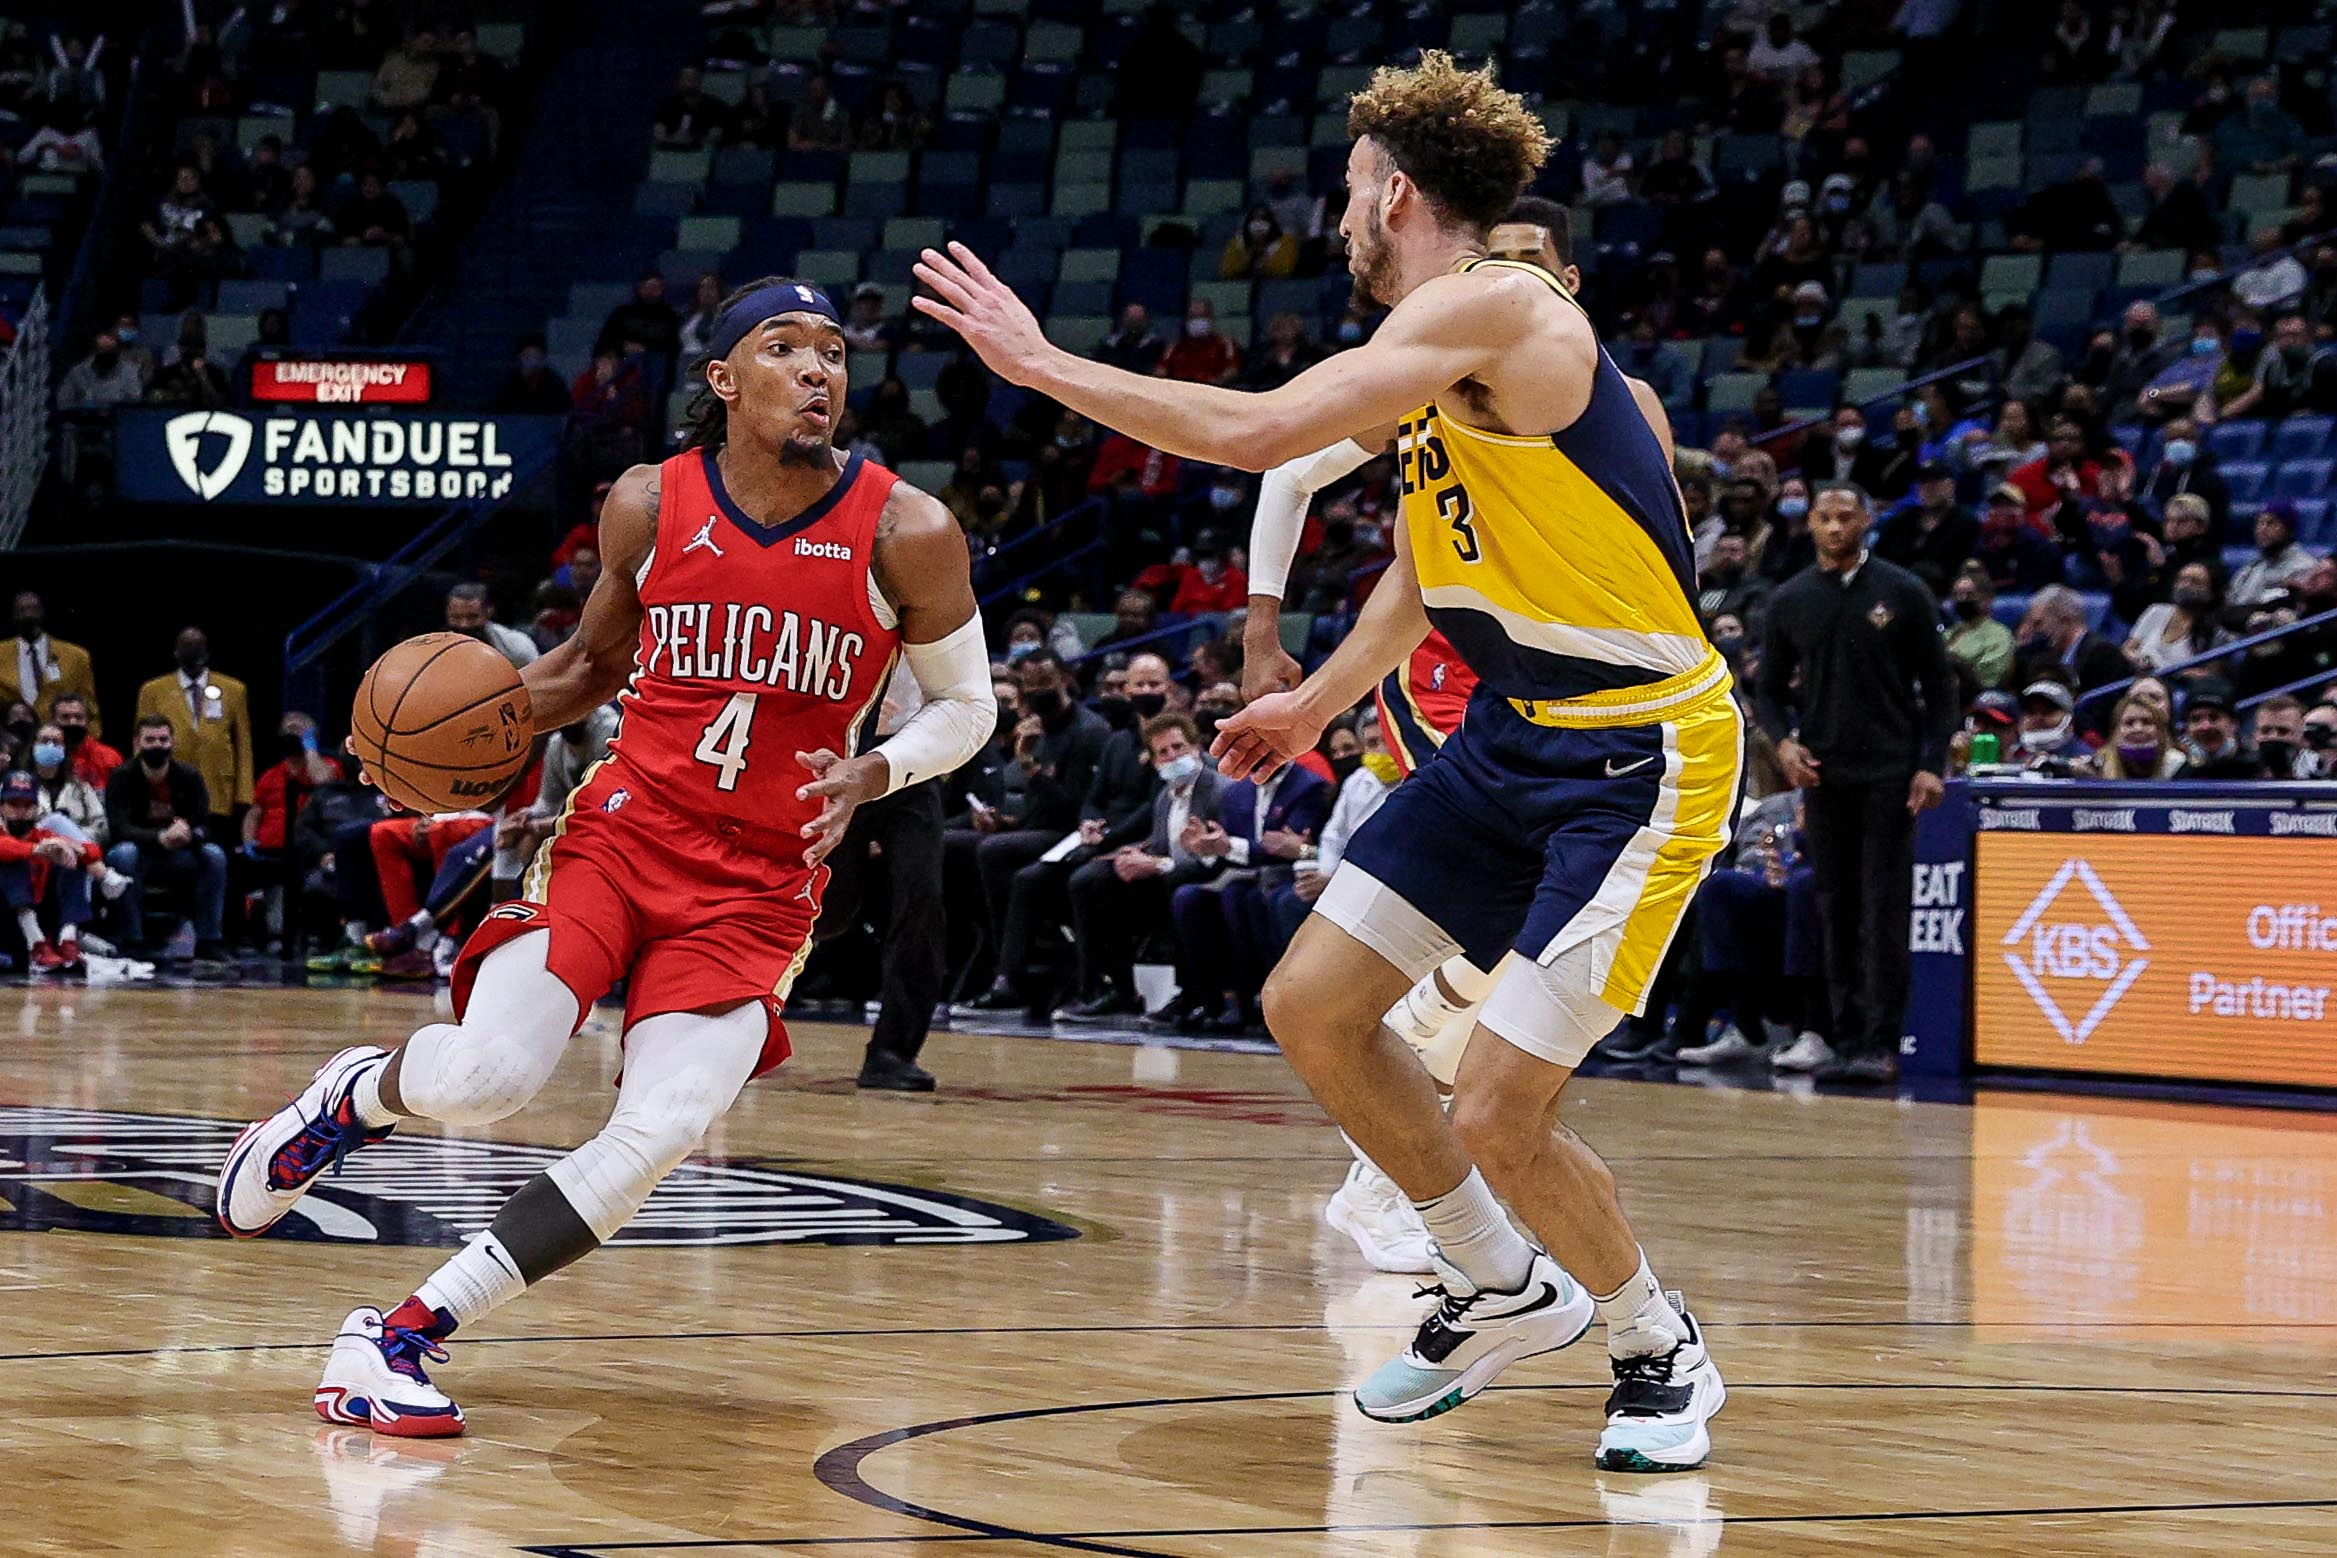 New Orleans Pelicans guard Devonte' Graham (4) dribbles against Indiana Pacers guard Chris Duarte (3) during the second half at the Smoothie King Center. 